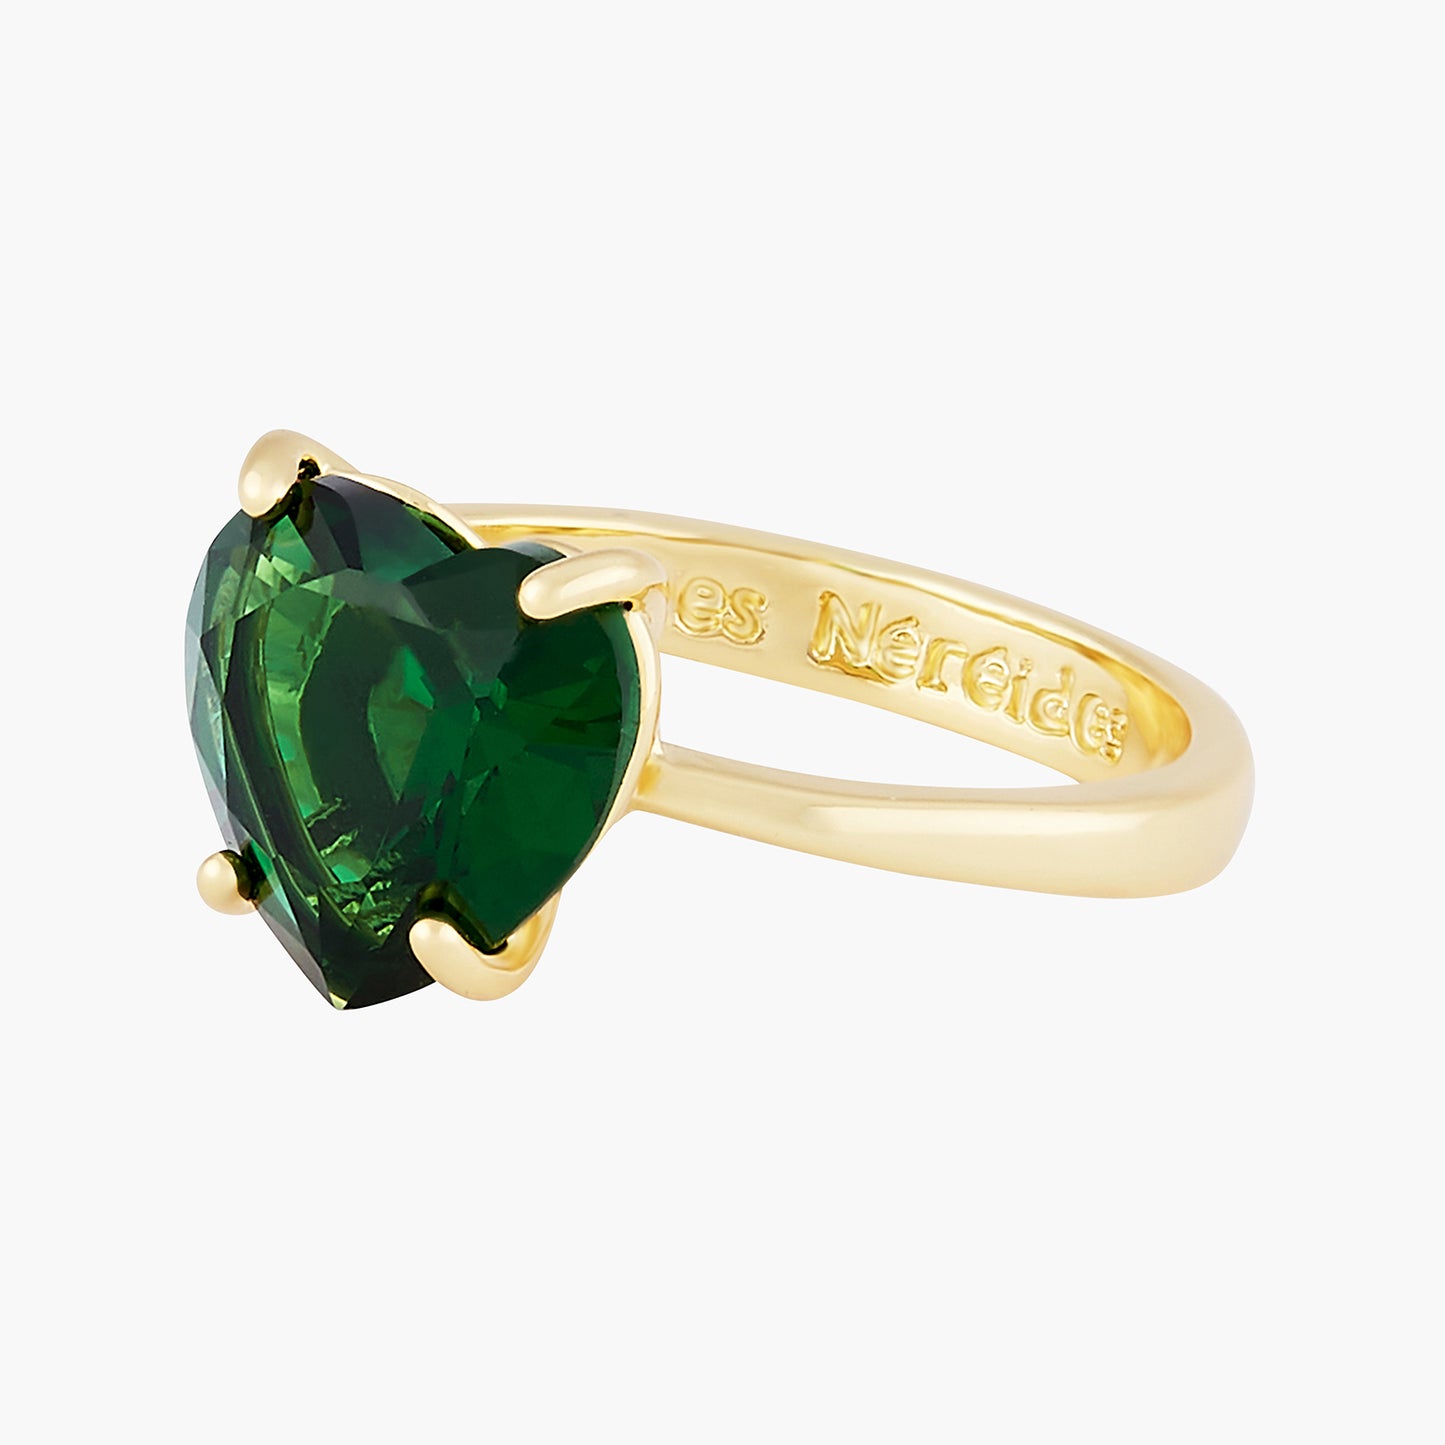 Emerald Green Heart Stone Diamantine Solitaire Ring | AOLD6171